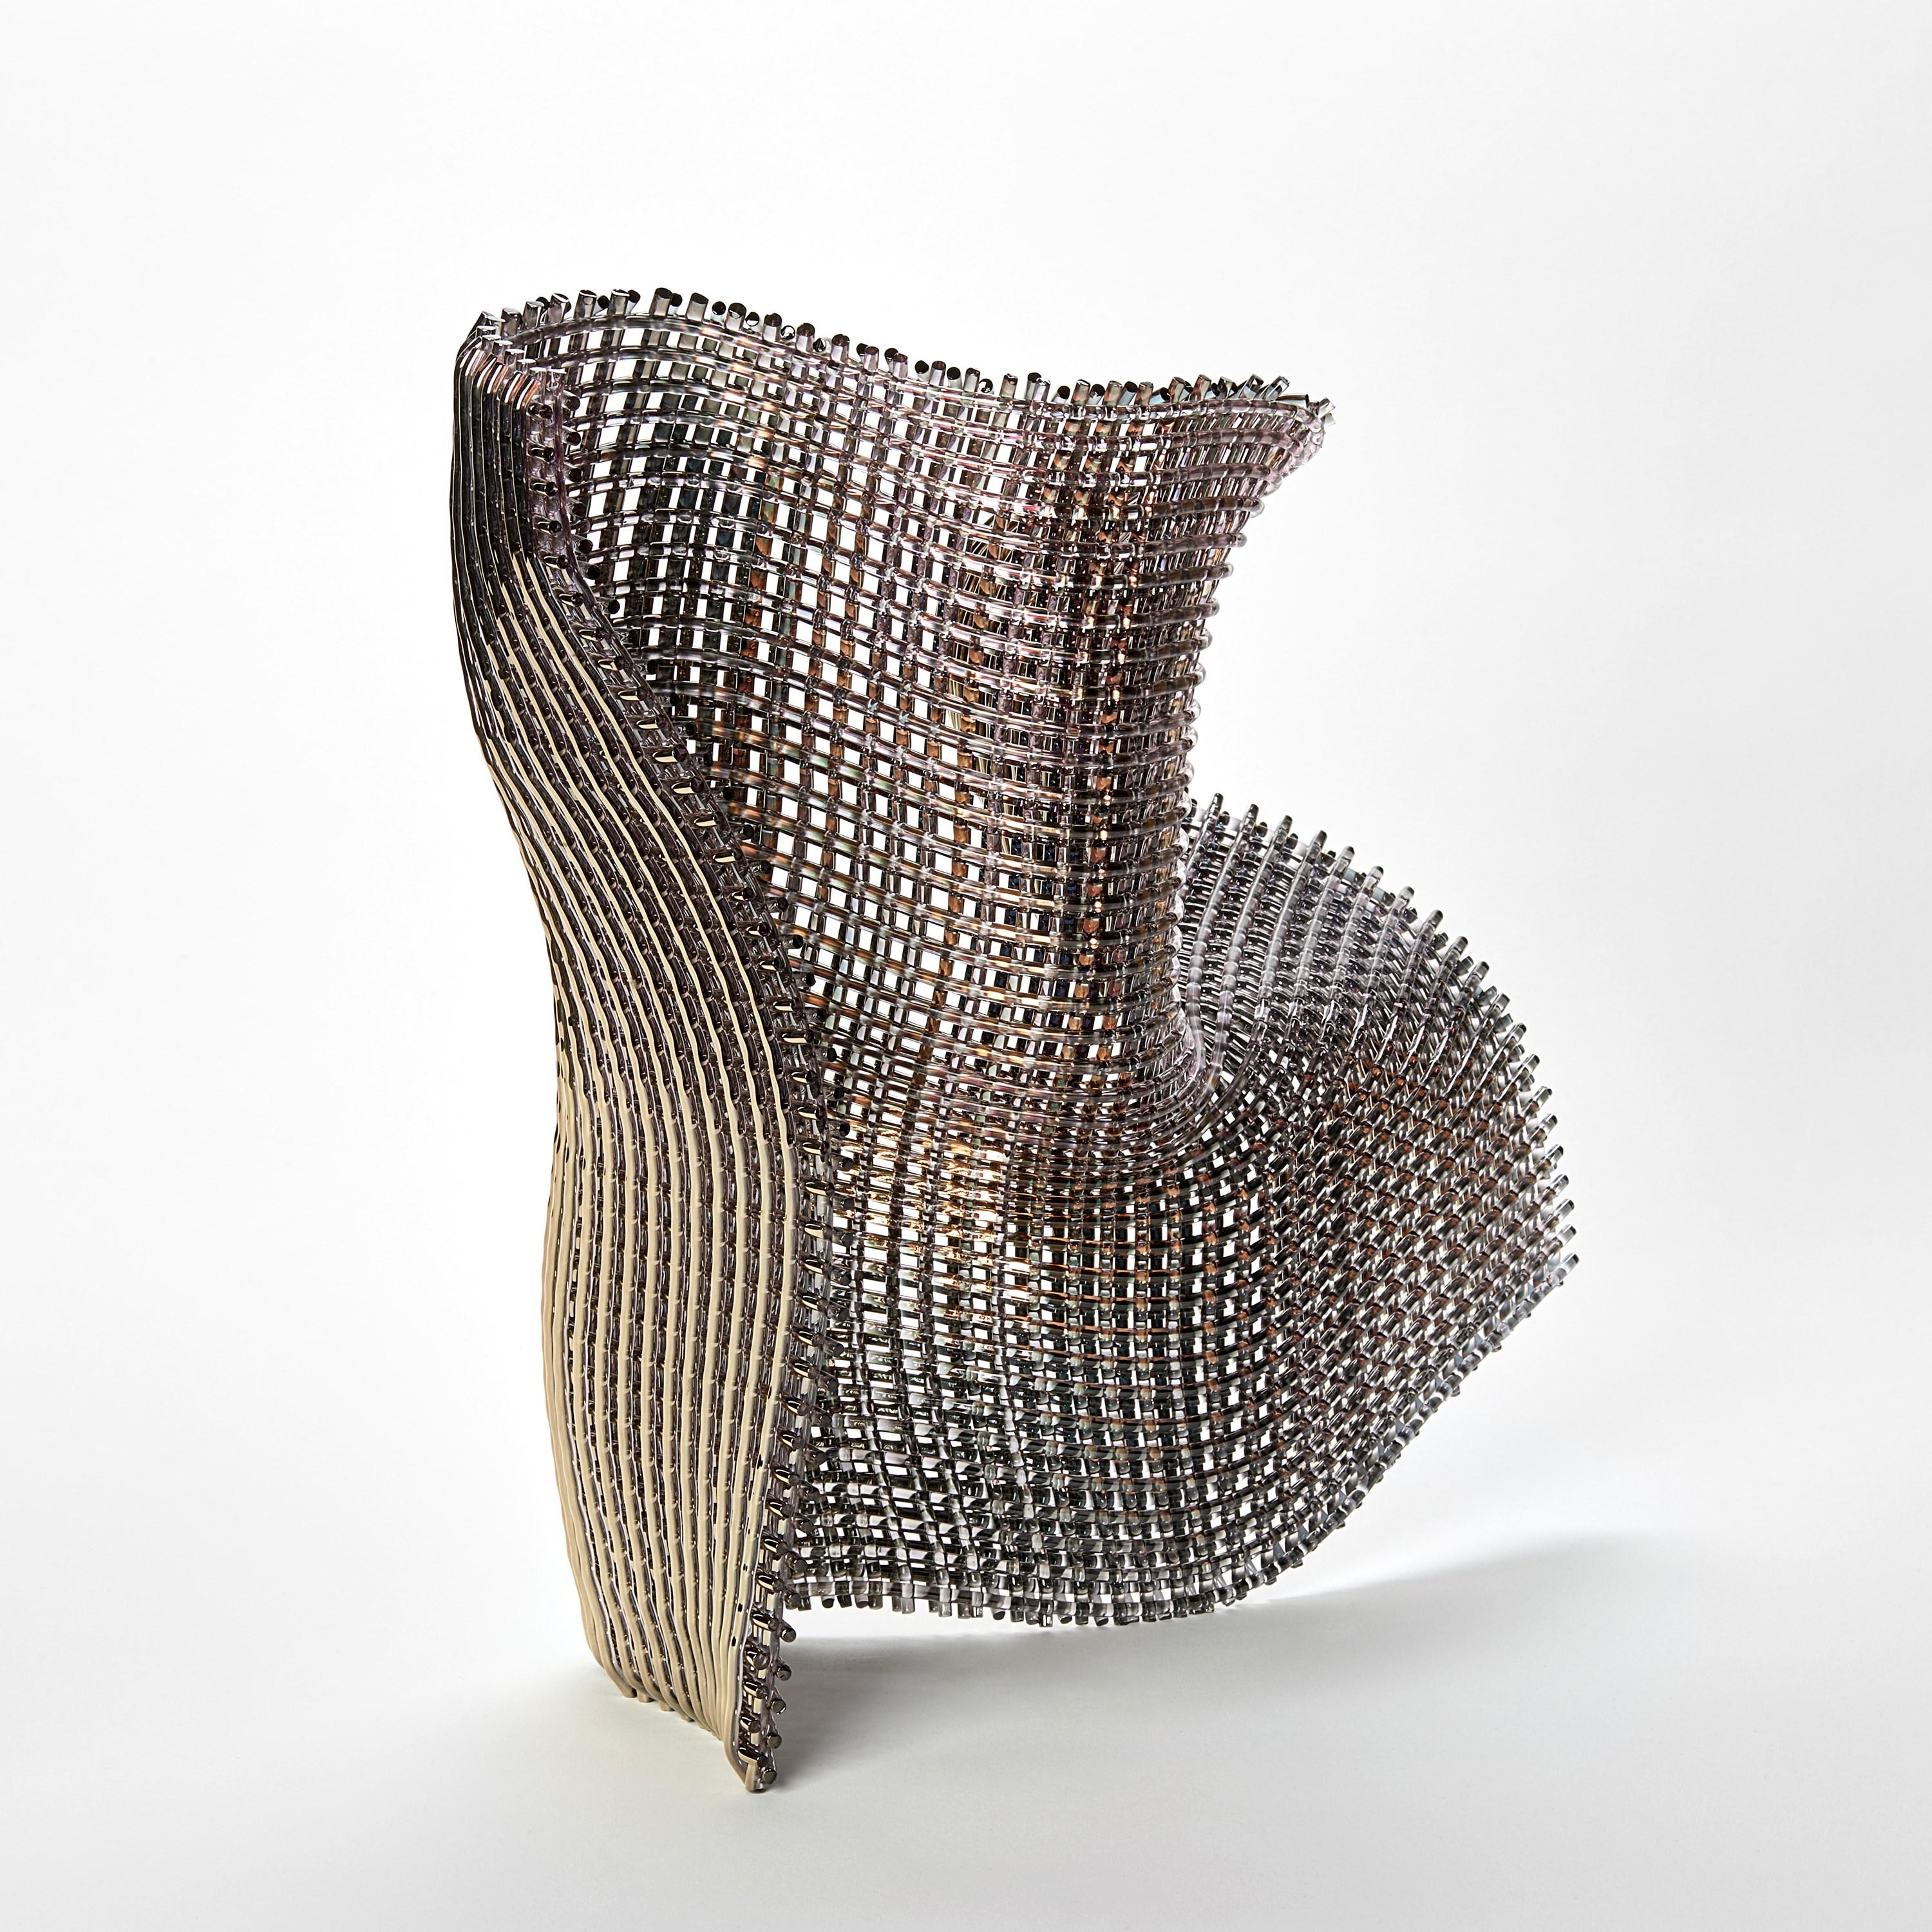 Hand-Crafted Masquerade, a woven gold & glass standing abstract sculpture by Cathryn Shilling